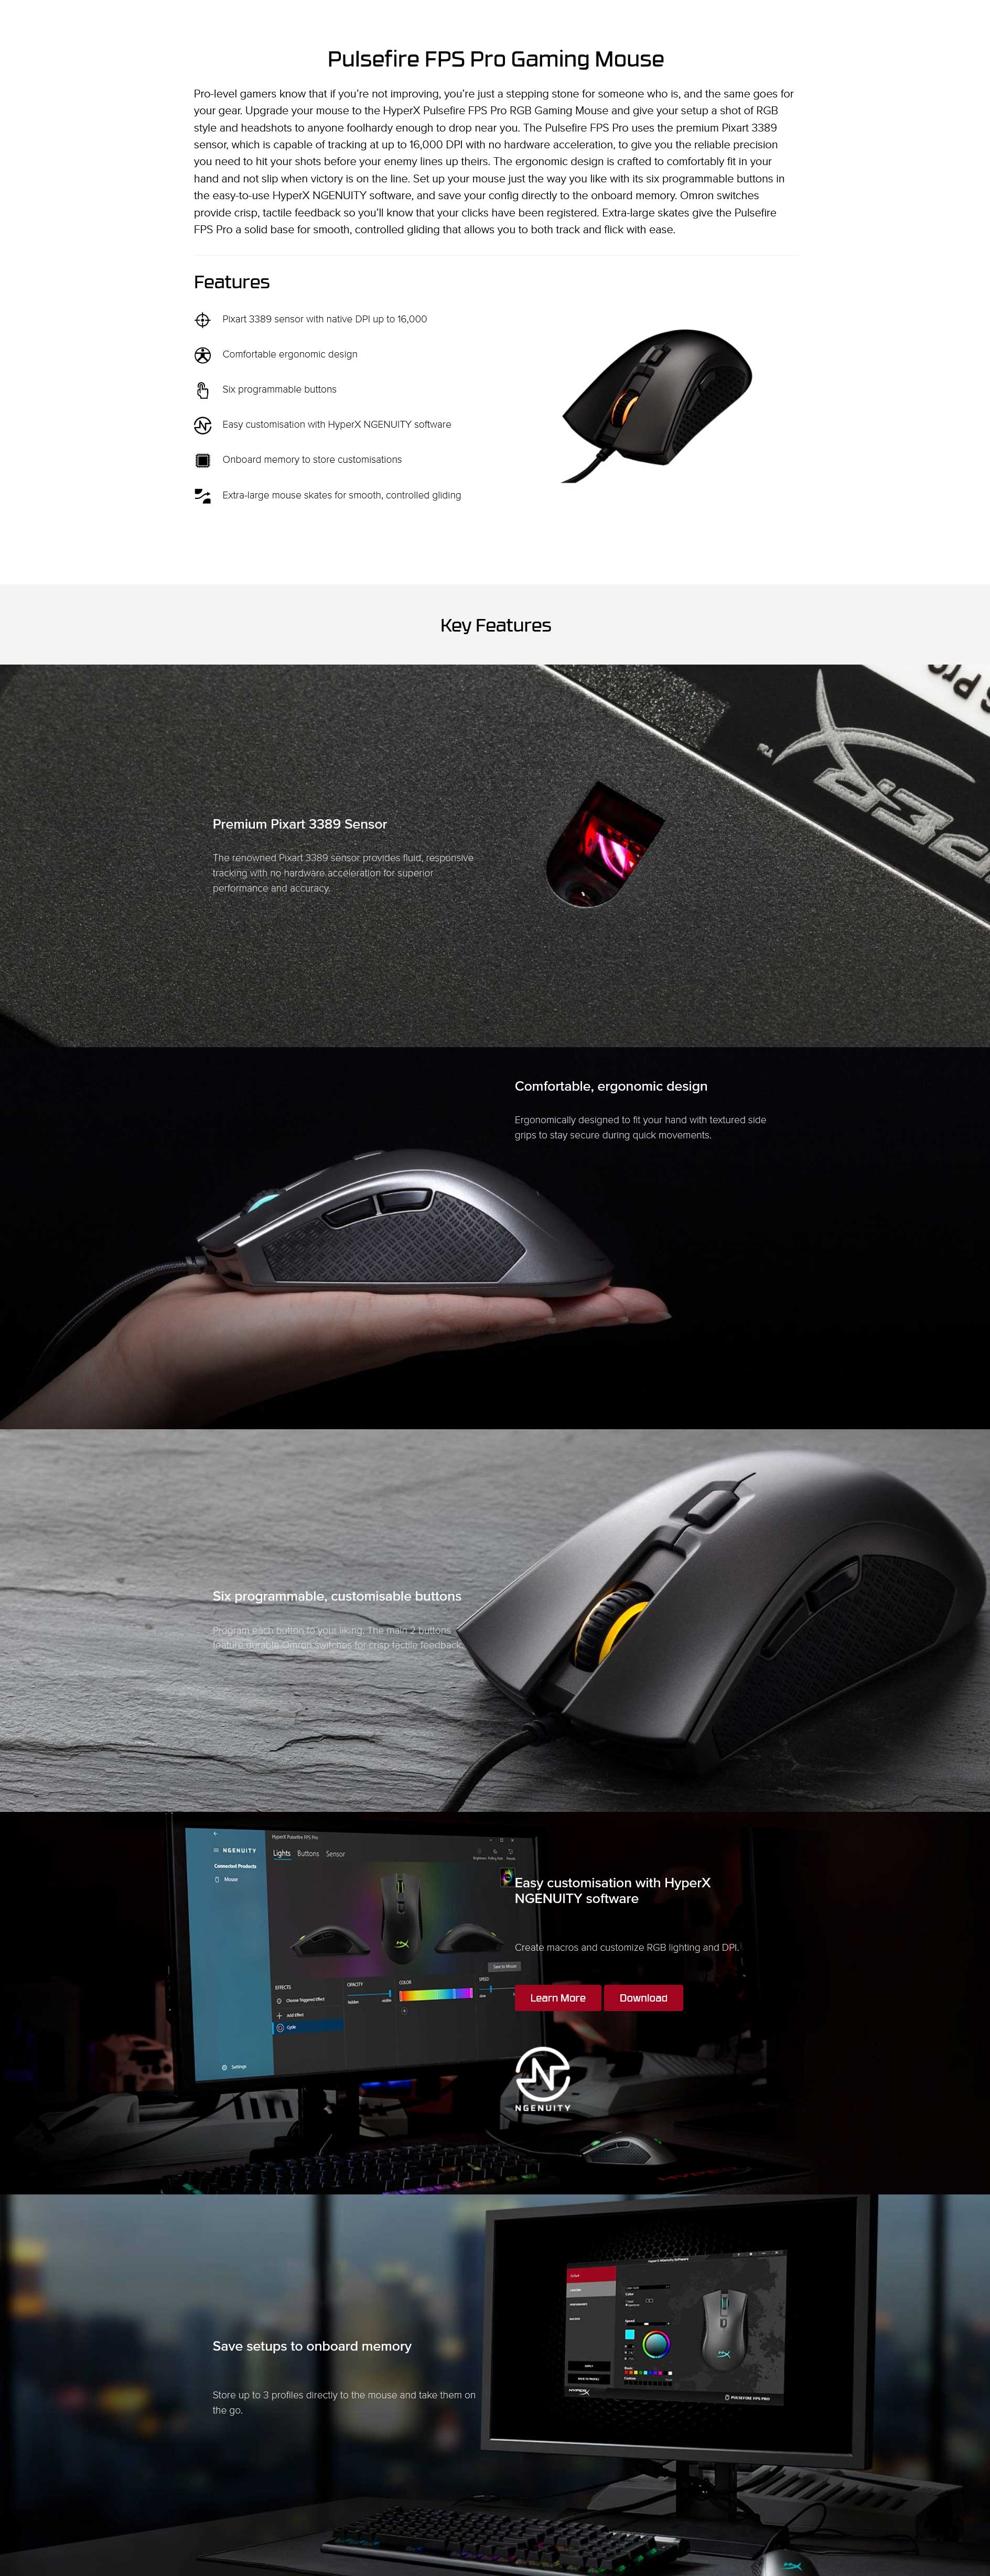 Kingston HyperX PulseFire Pro Wired Gaming Mouse 
HX-MC003B Details